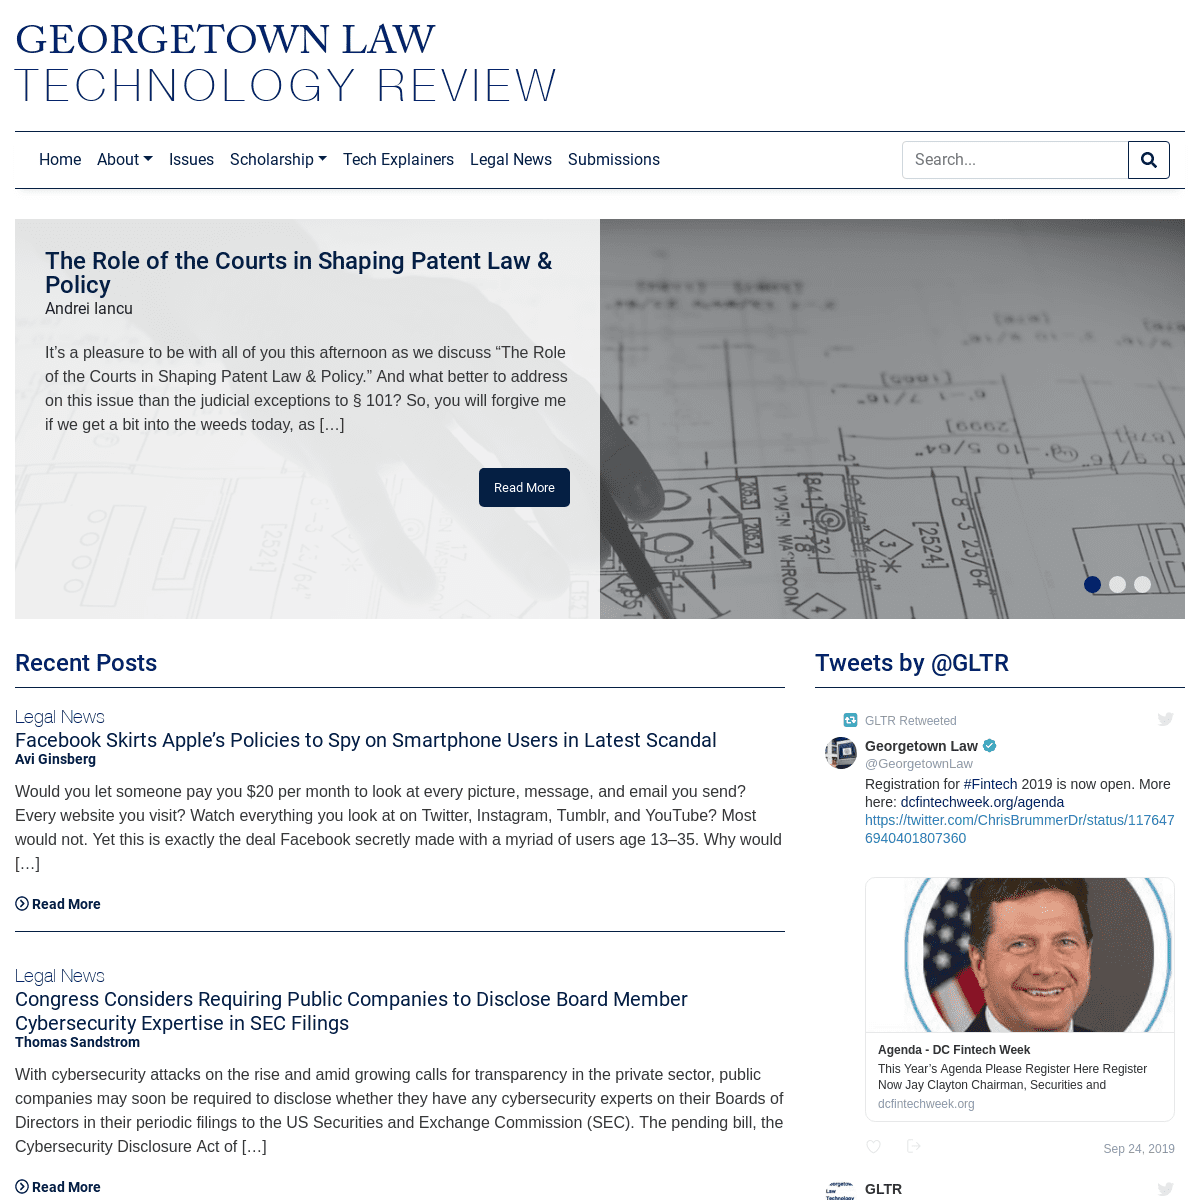 Georgetown Law Technology Review